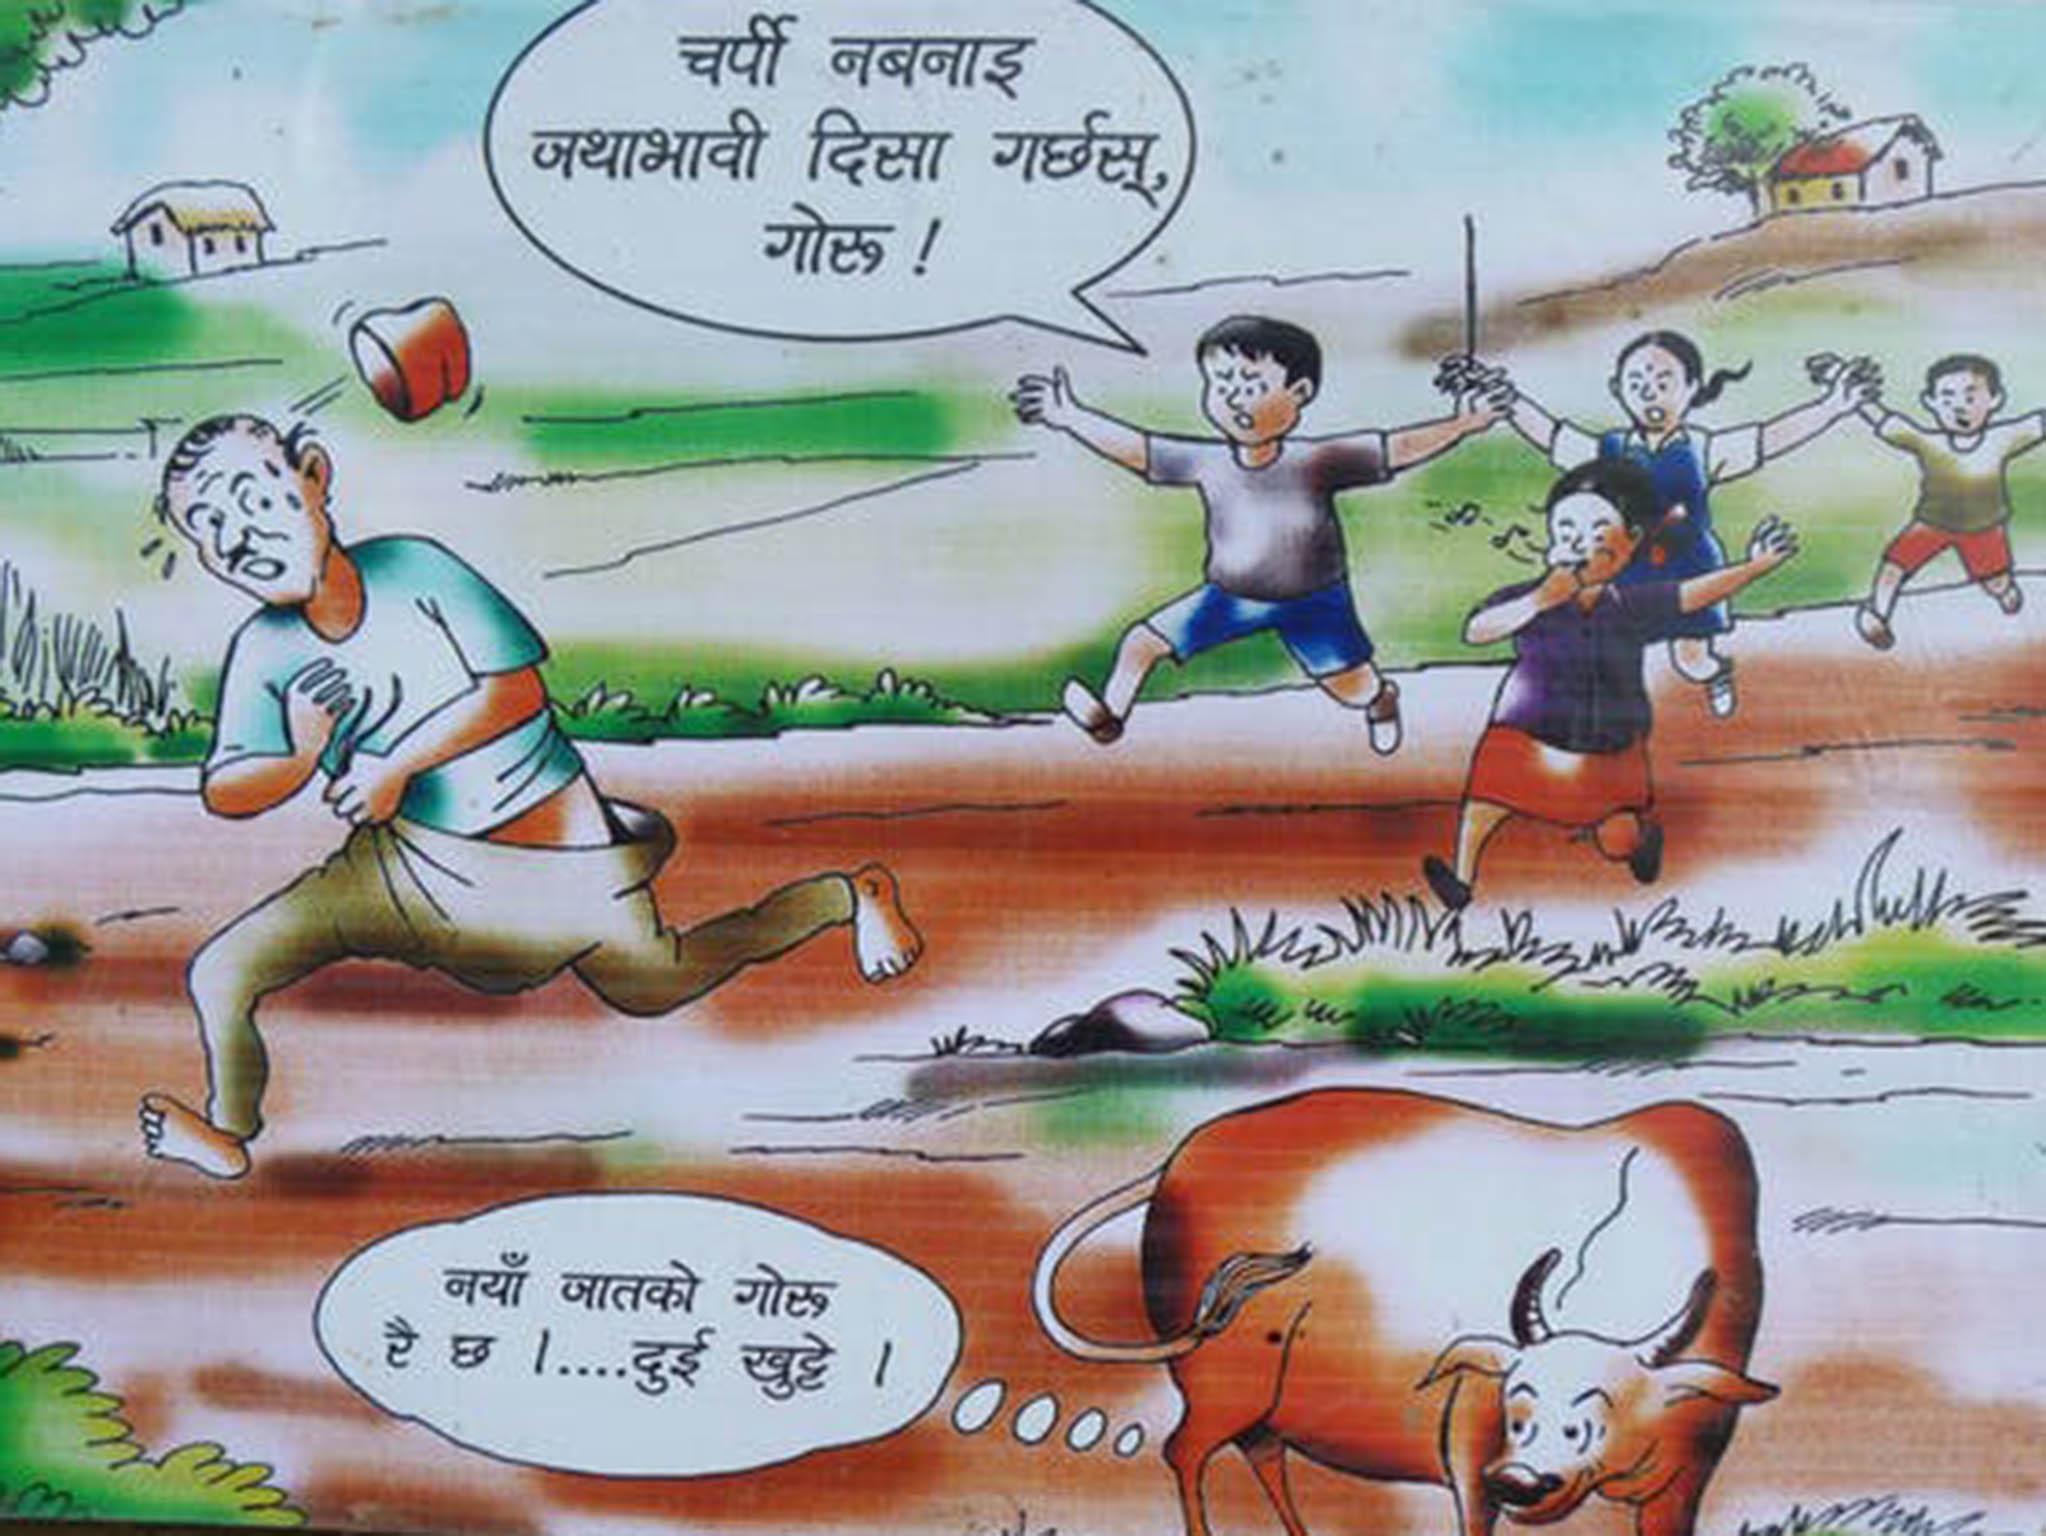 A banner in a Nepali village promoting safe sanitation, as open defecation is ‘only for cows’